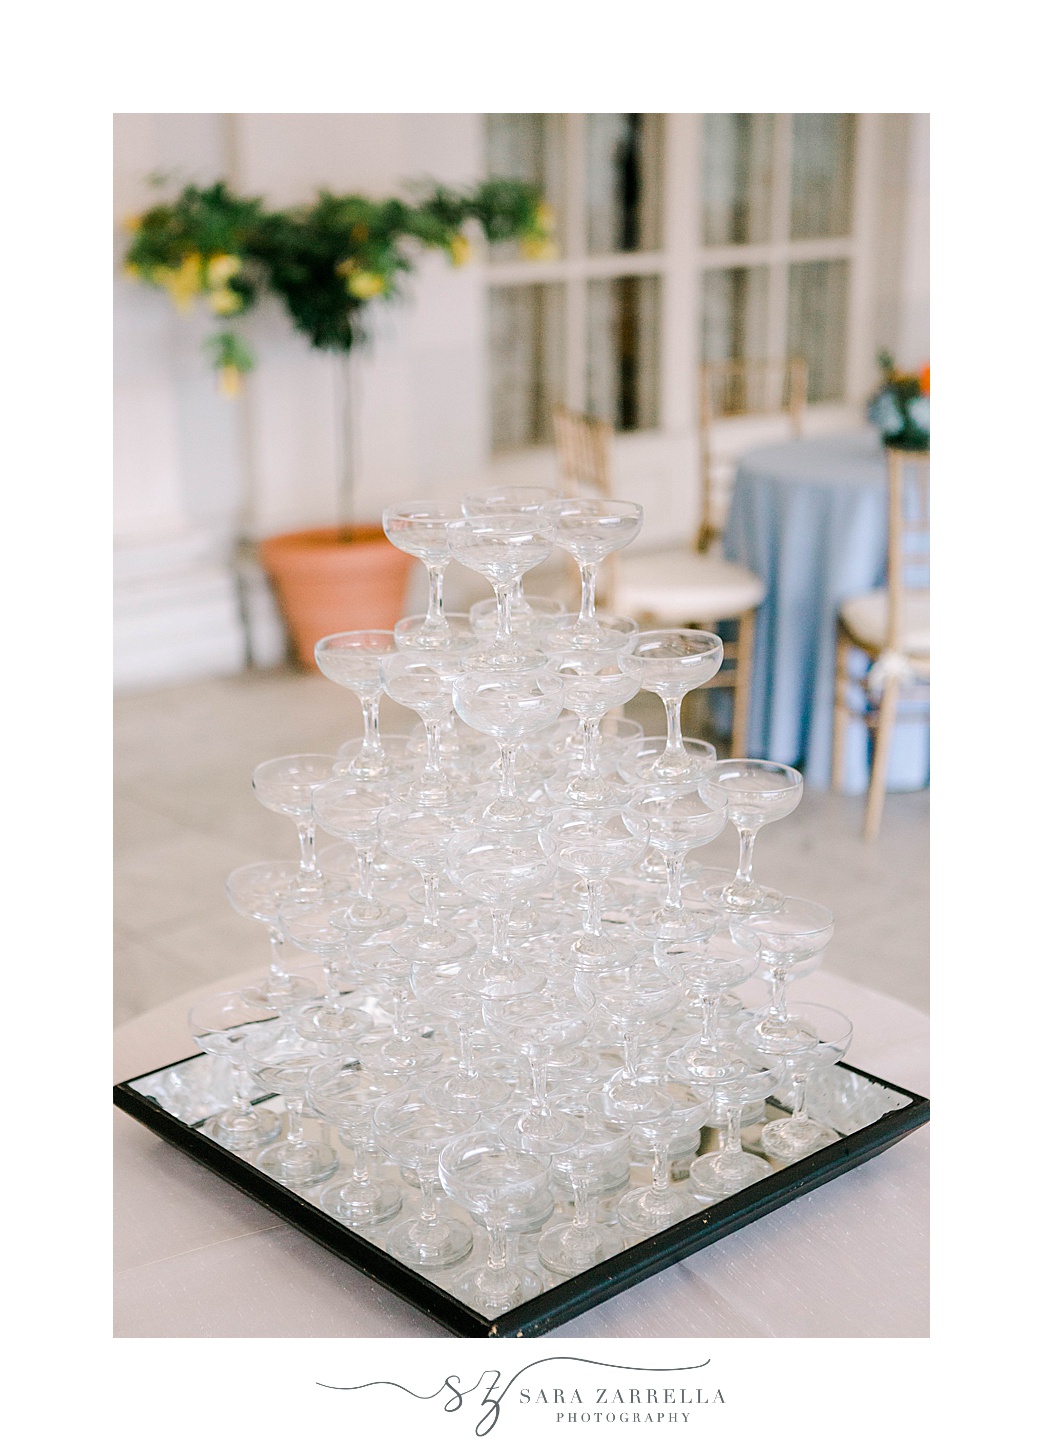 champagne glasses stacked in tower